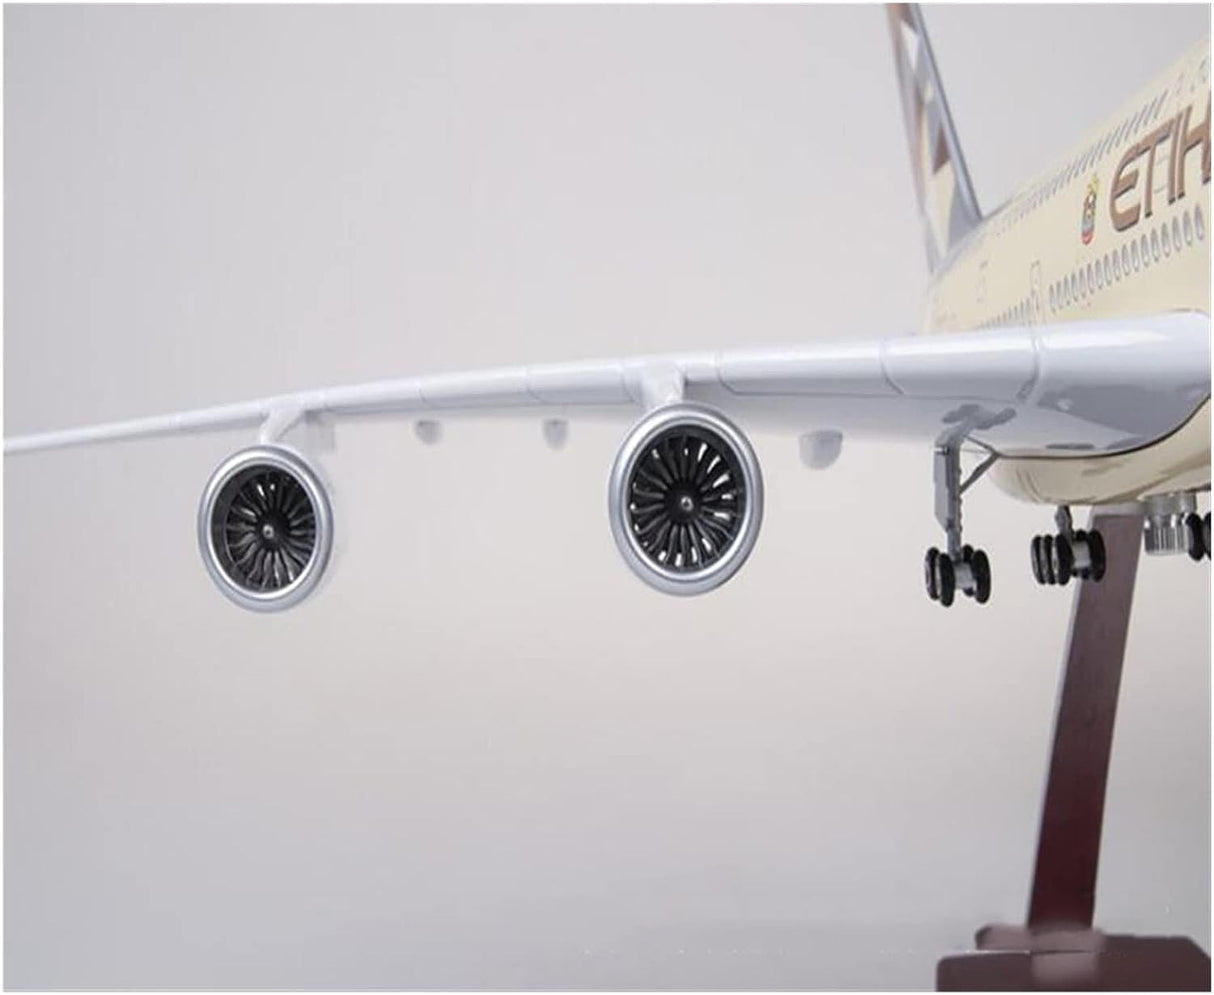 Etihad AirplaneModels 1/160Fit for Plastic Resin Aviation Airbus A380 ETIHAD Aircraft Model with Lights and Wheels Collection Plane.